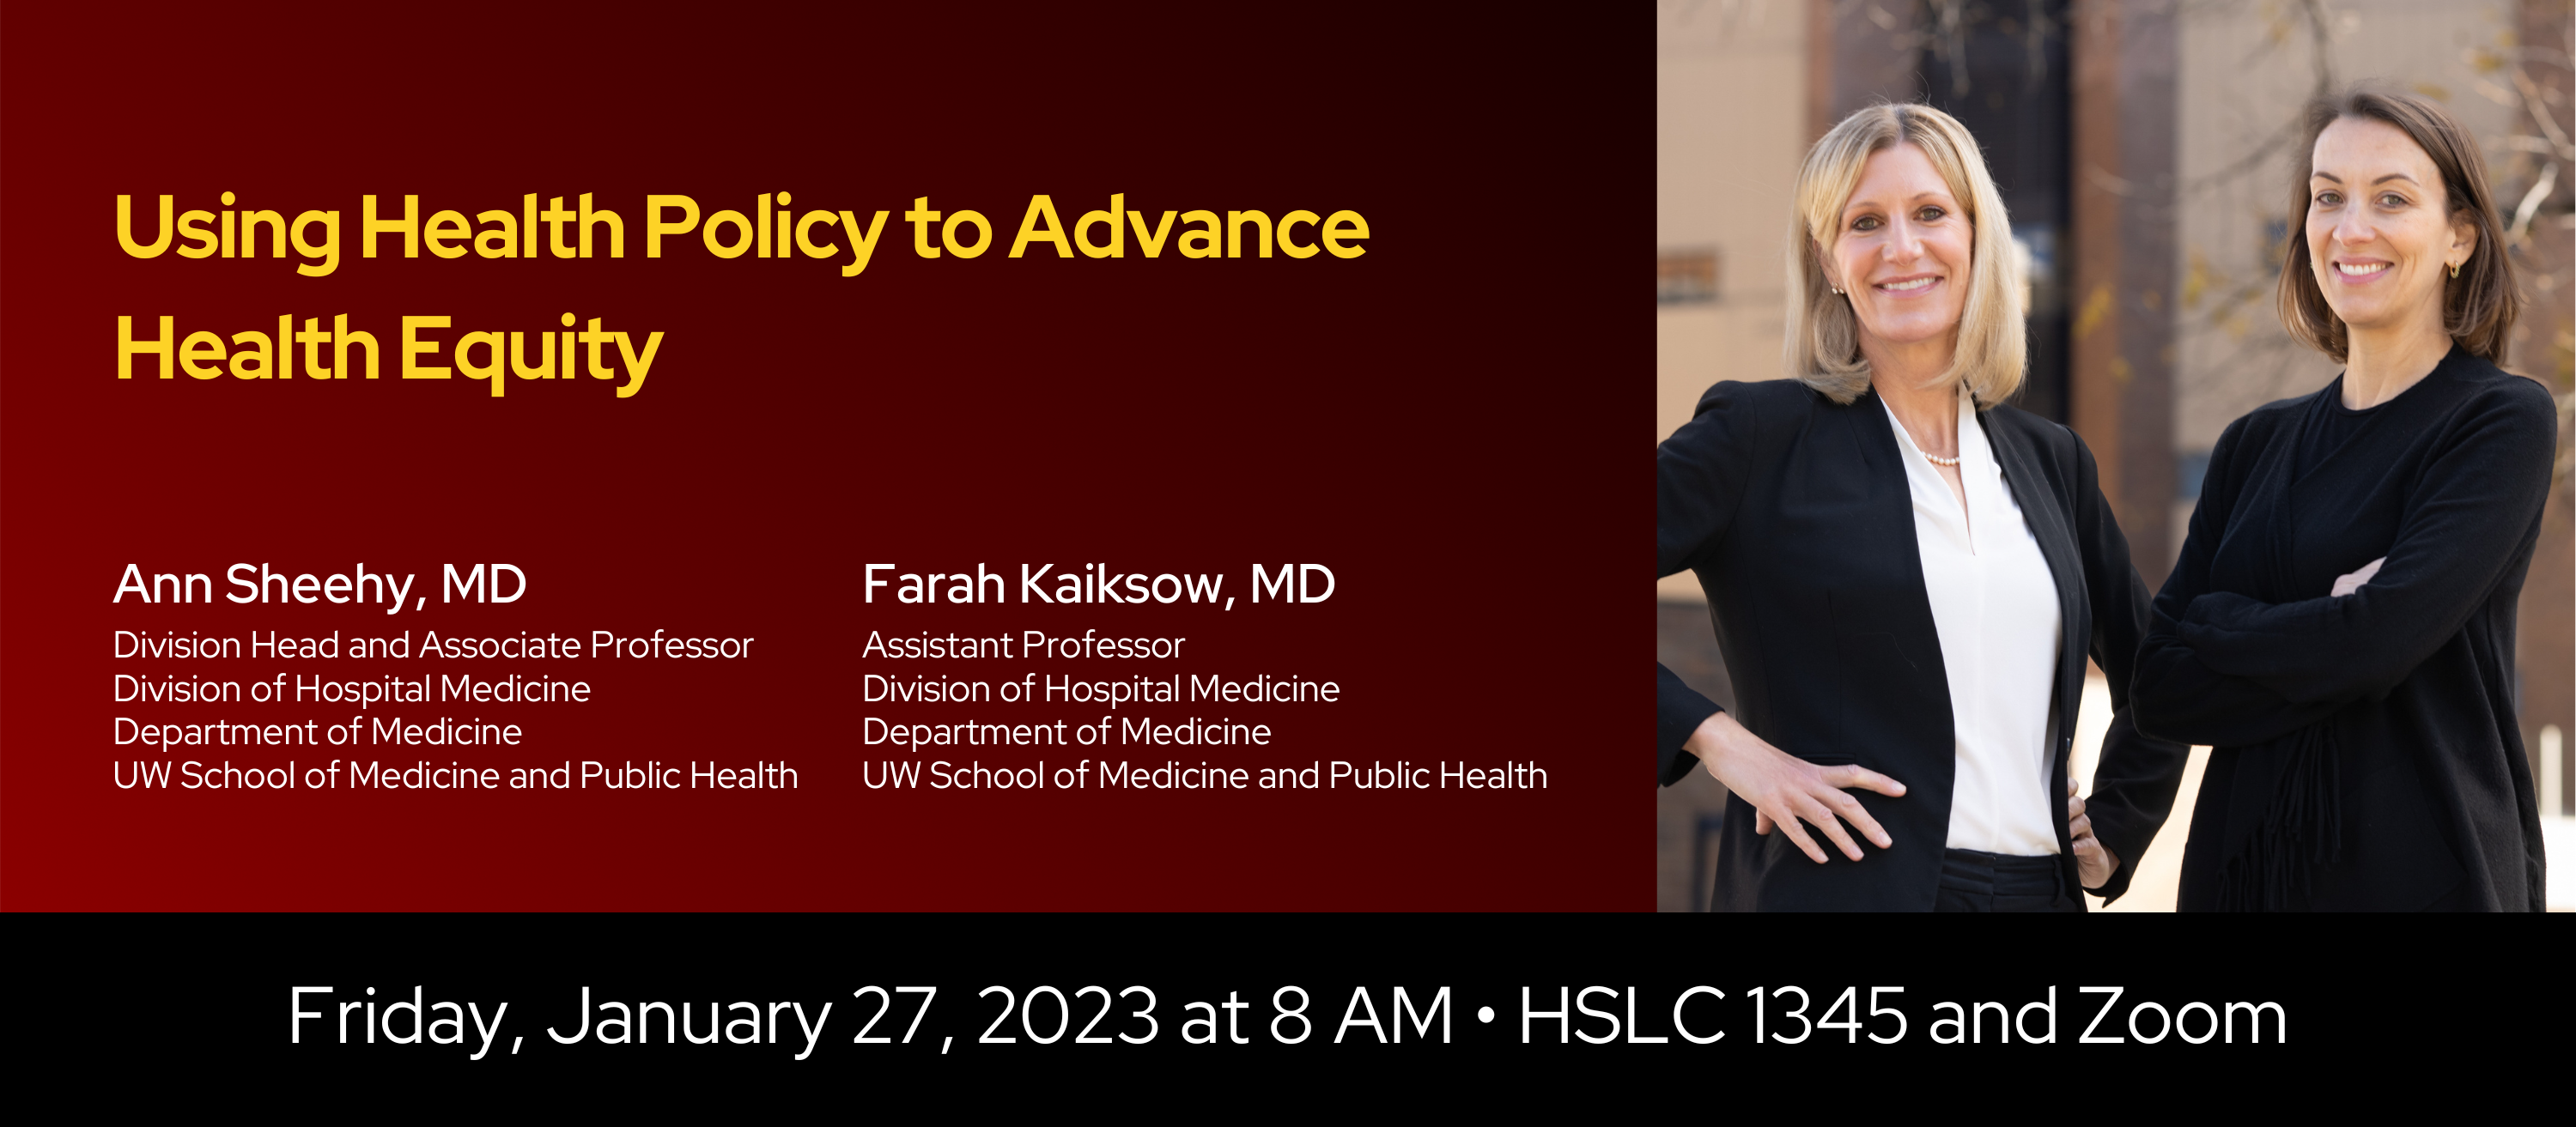 Title: Using Health Policy to Advance Health Equity